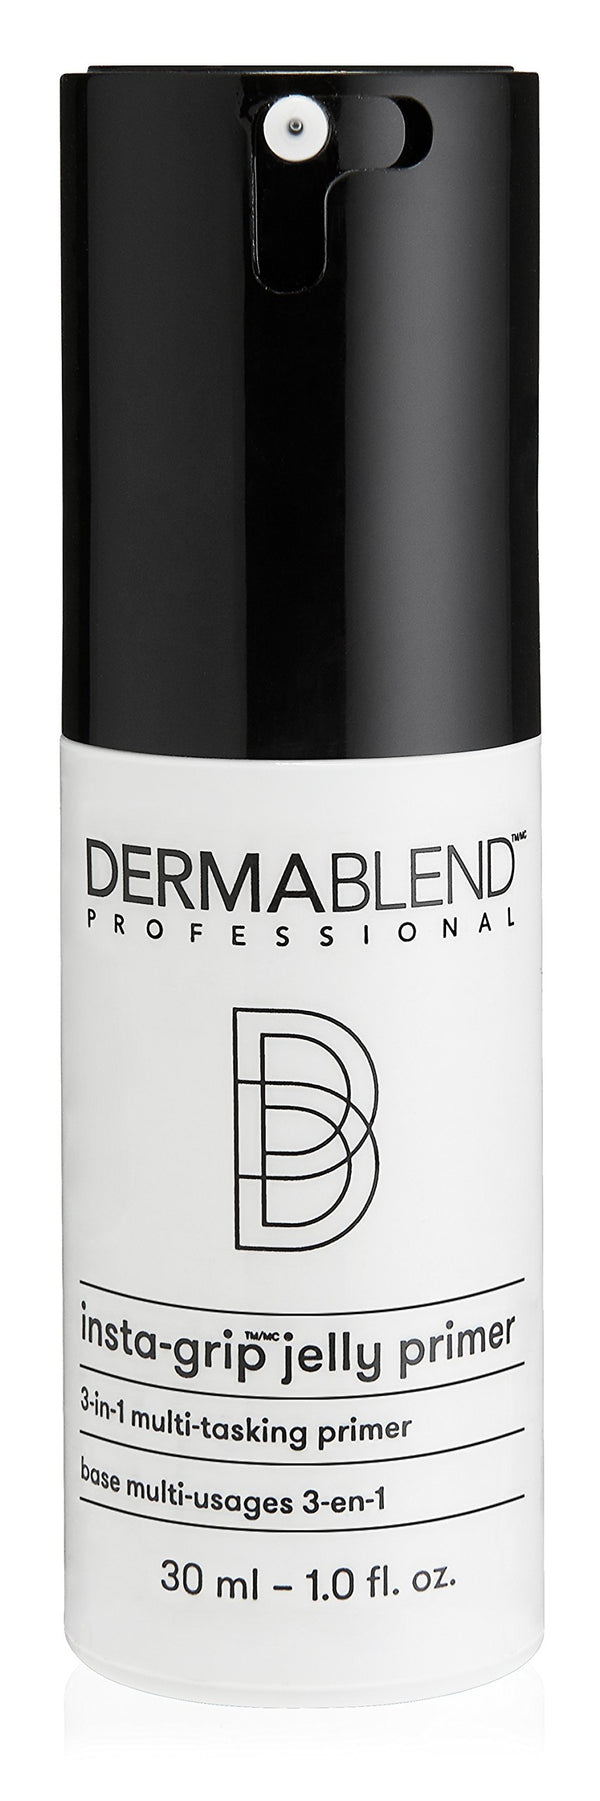 Dermablend Professional Insta-Grip Jelly Primer - 3-in-1: 24-Hour Makeup Extender, Instant Moisturizer, and Skin Tightening Mask - Dermatologist-Created, Fragrance-Free, Allergy-Tested - 30 ml